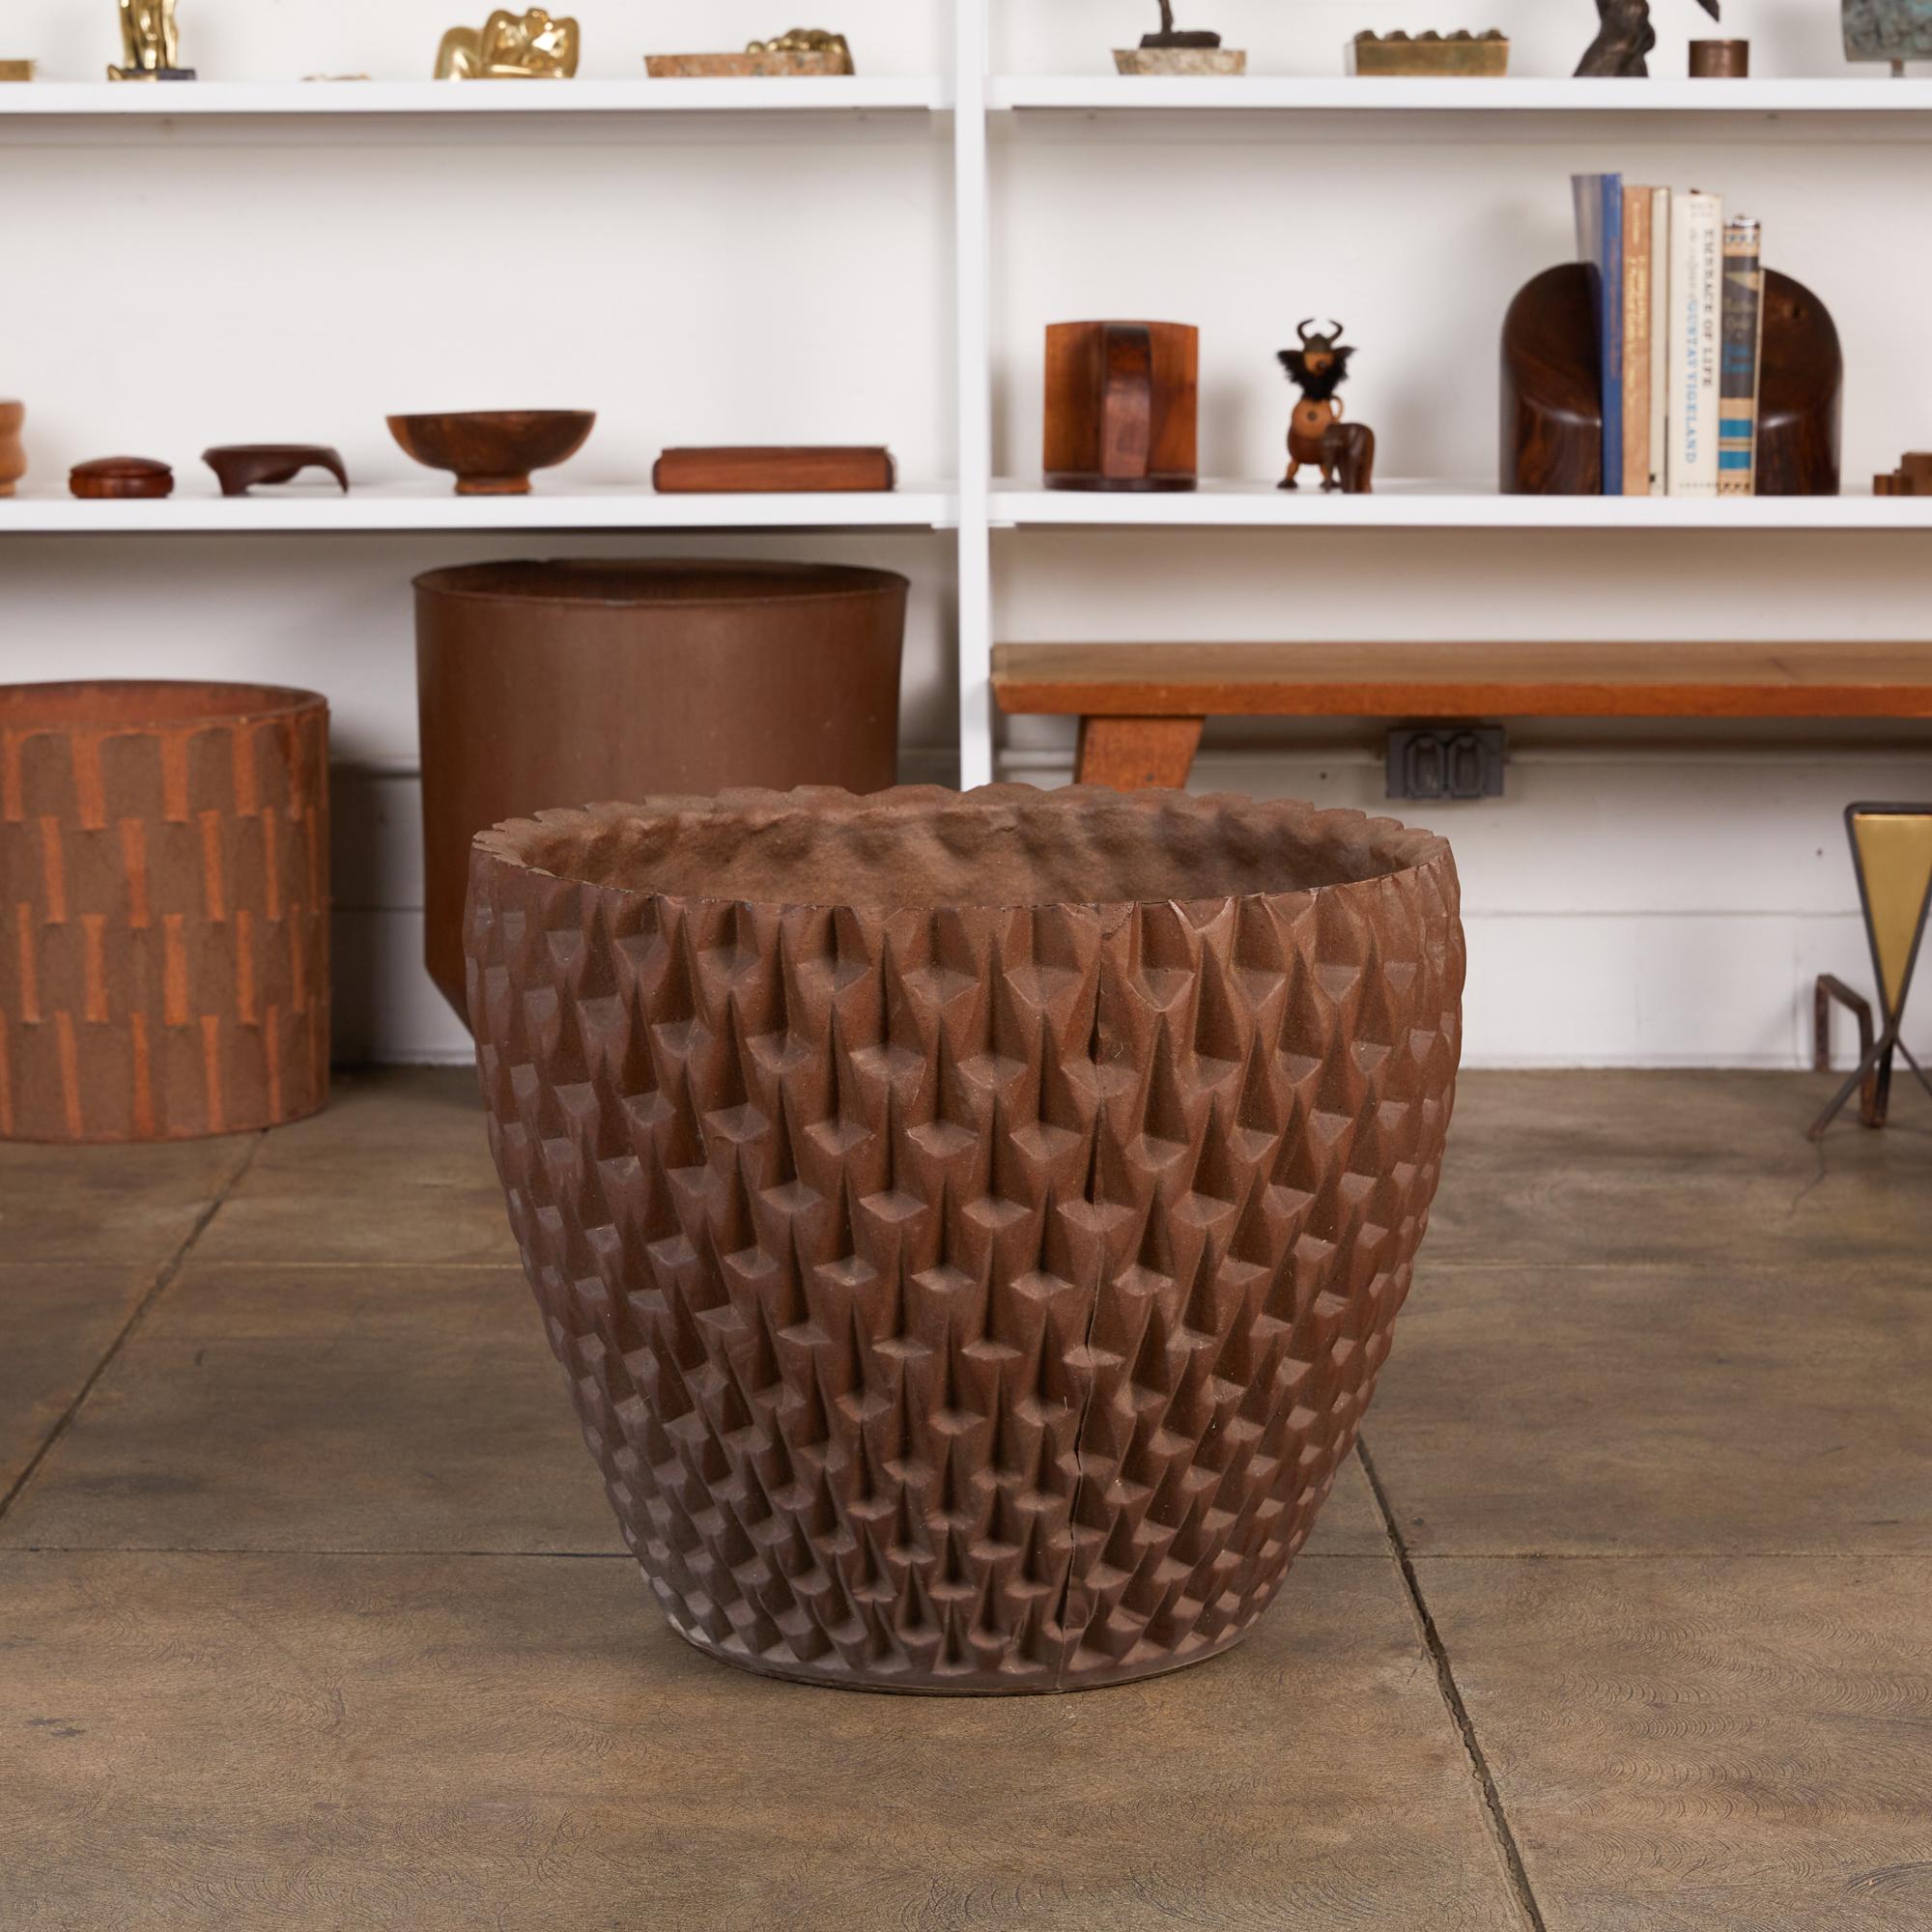 Designed by David Cressey in 1963 as part of the Pro/Artisan stoneware collection for Architectural Pottery, the slip cast Phoenix planter has a bowl shape with an all-over geometric relief. This example is finished in unglazed stoneware emphasizing